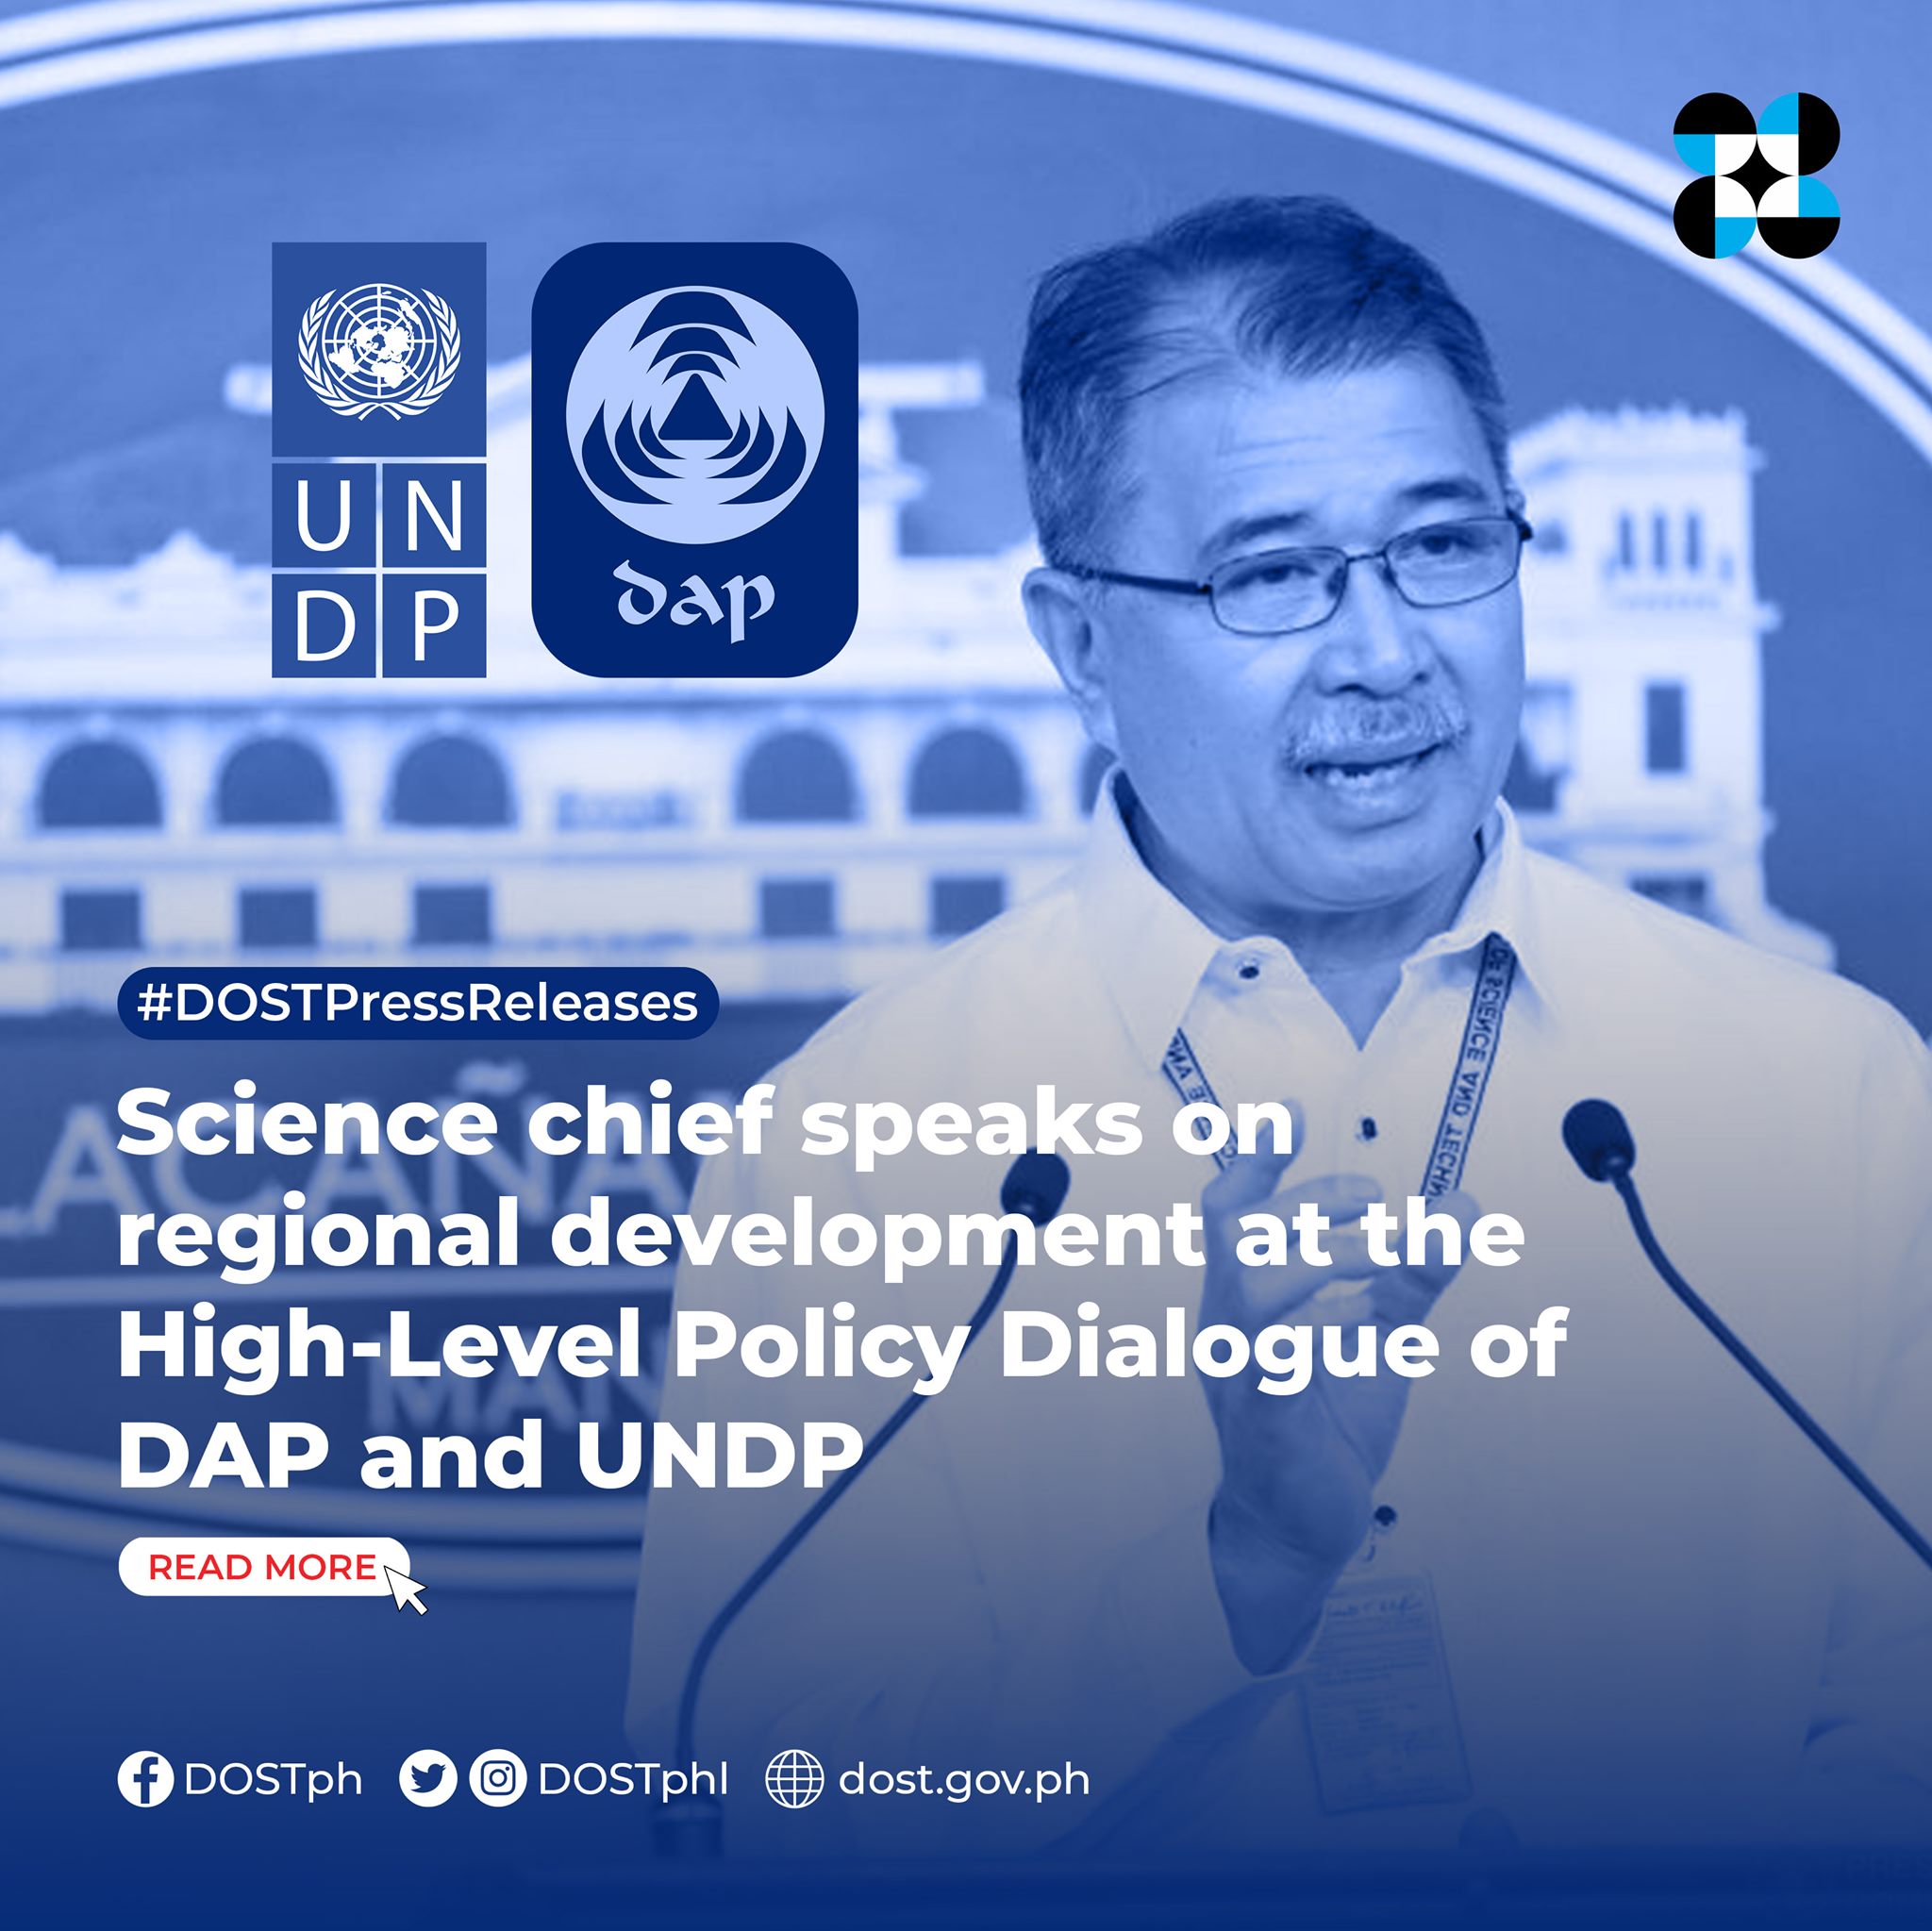 Science chief speaks on regional development at the High-Level Policy Dialogue of DAP and UNDP image